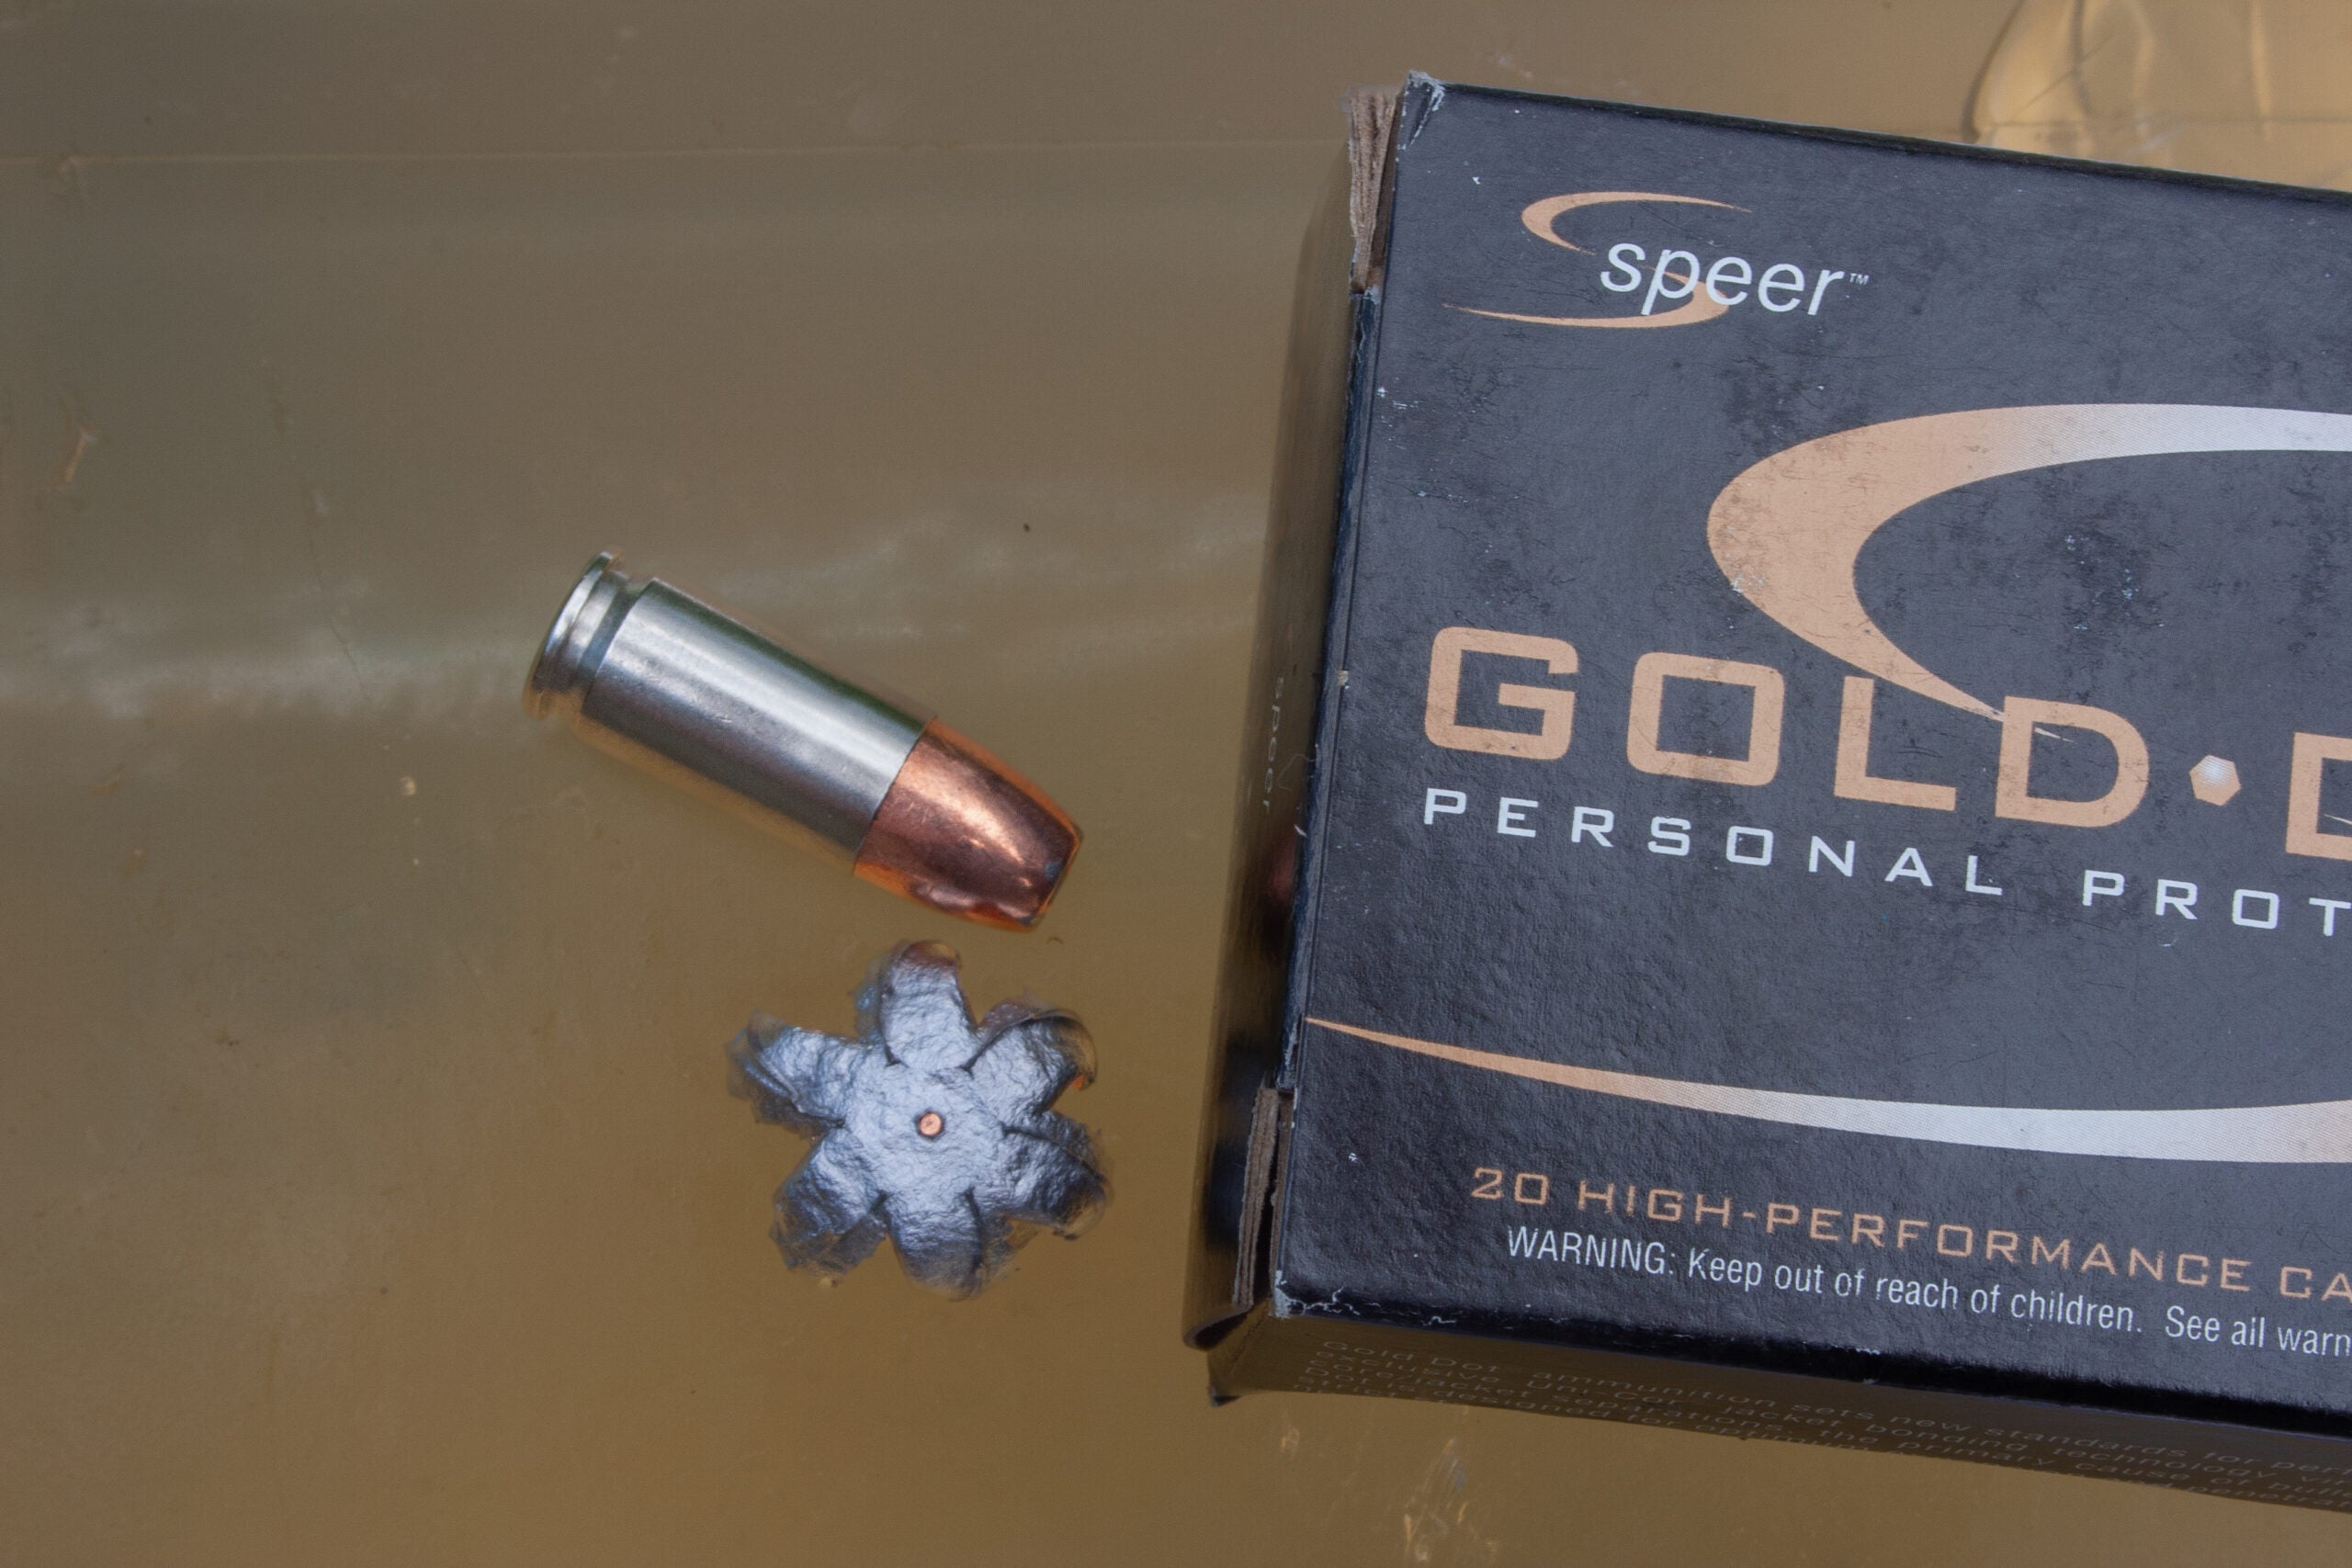 Box of 9mm ammo, fired bullet, and unfired cartridge sit atop a block of ballistics gel